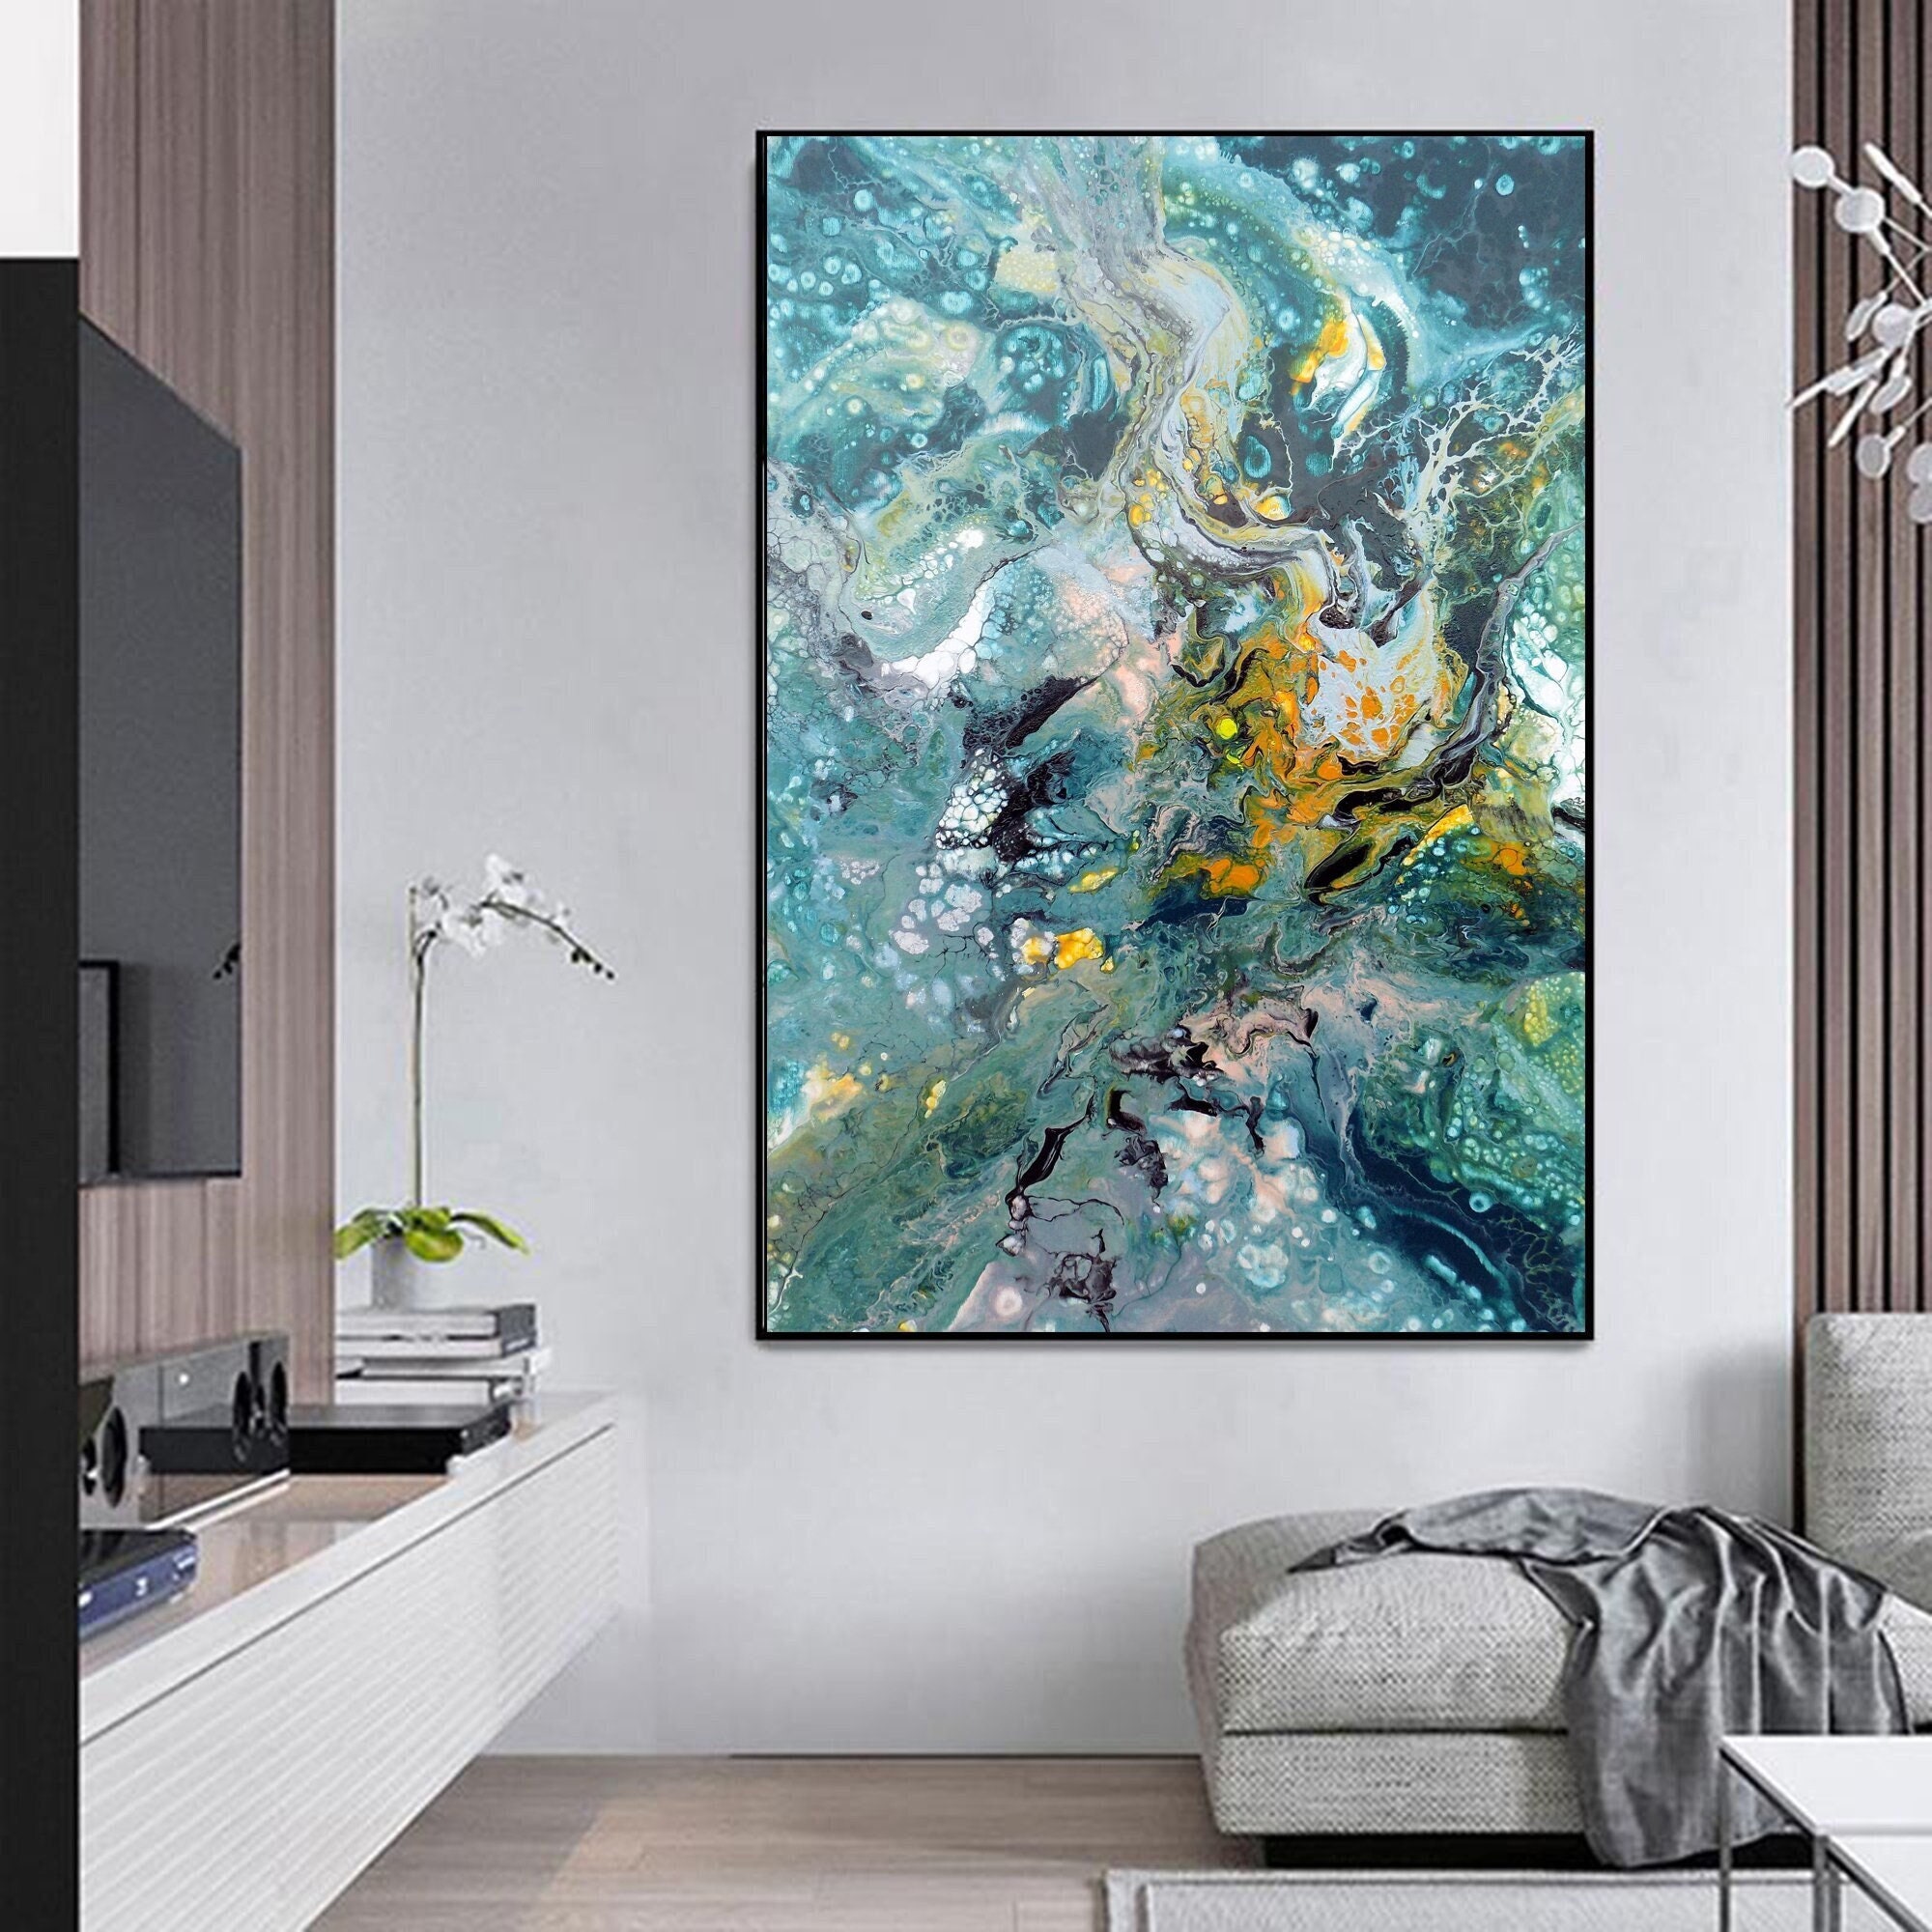 Abstract art green gray original painting on canvas one of a kind artworkthumbnail